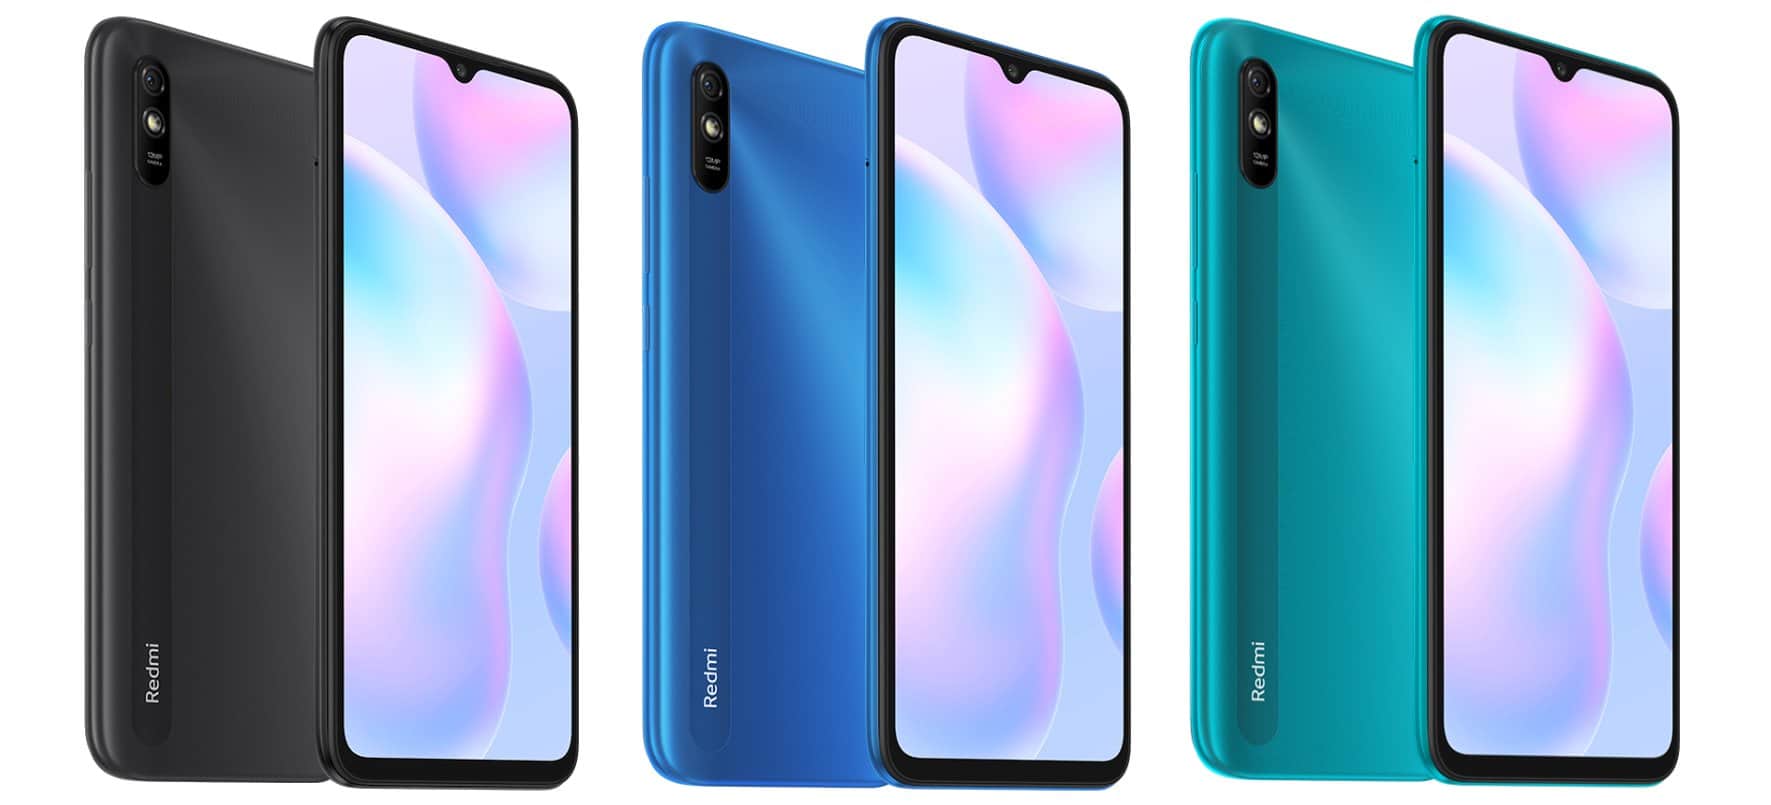 Redmi 9A, Redmi 9C launched with 6.53-inch display and Helio G35